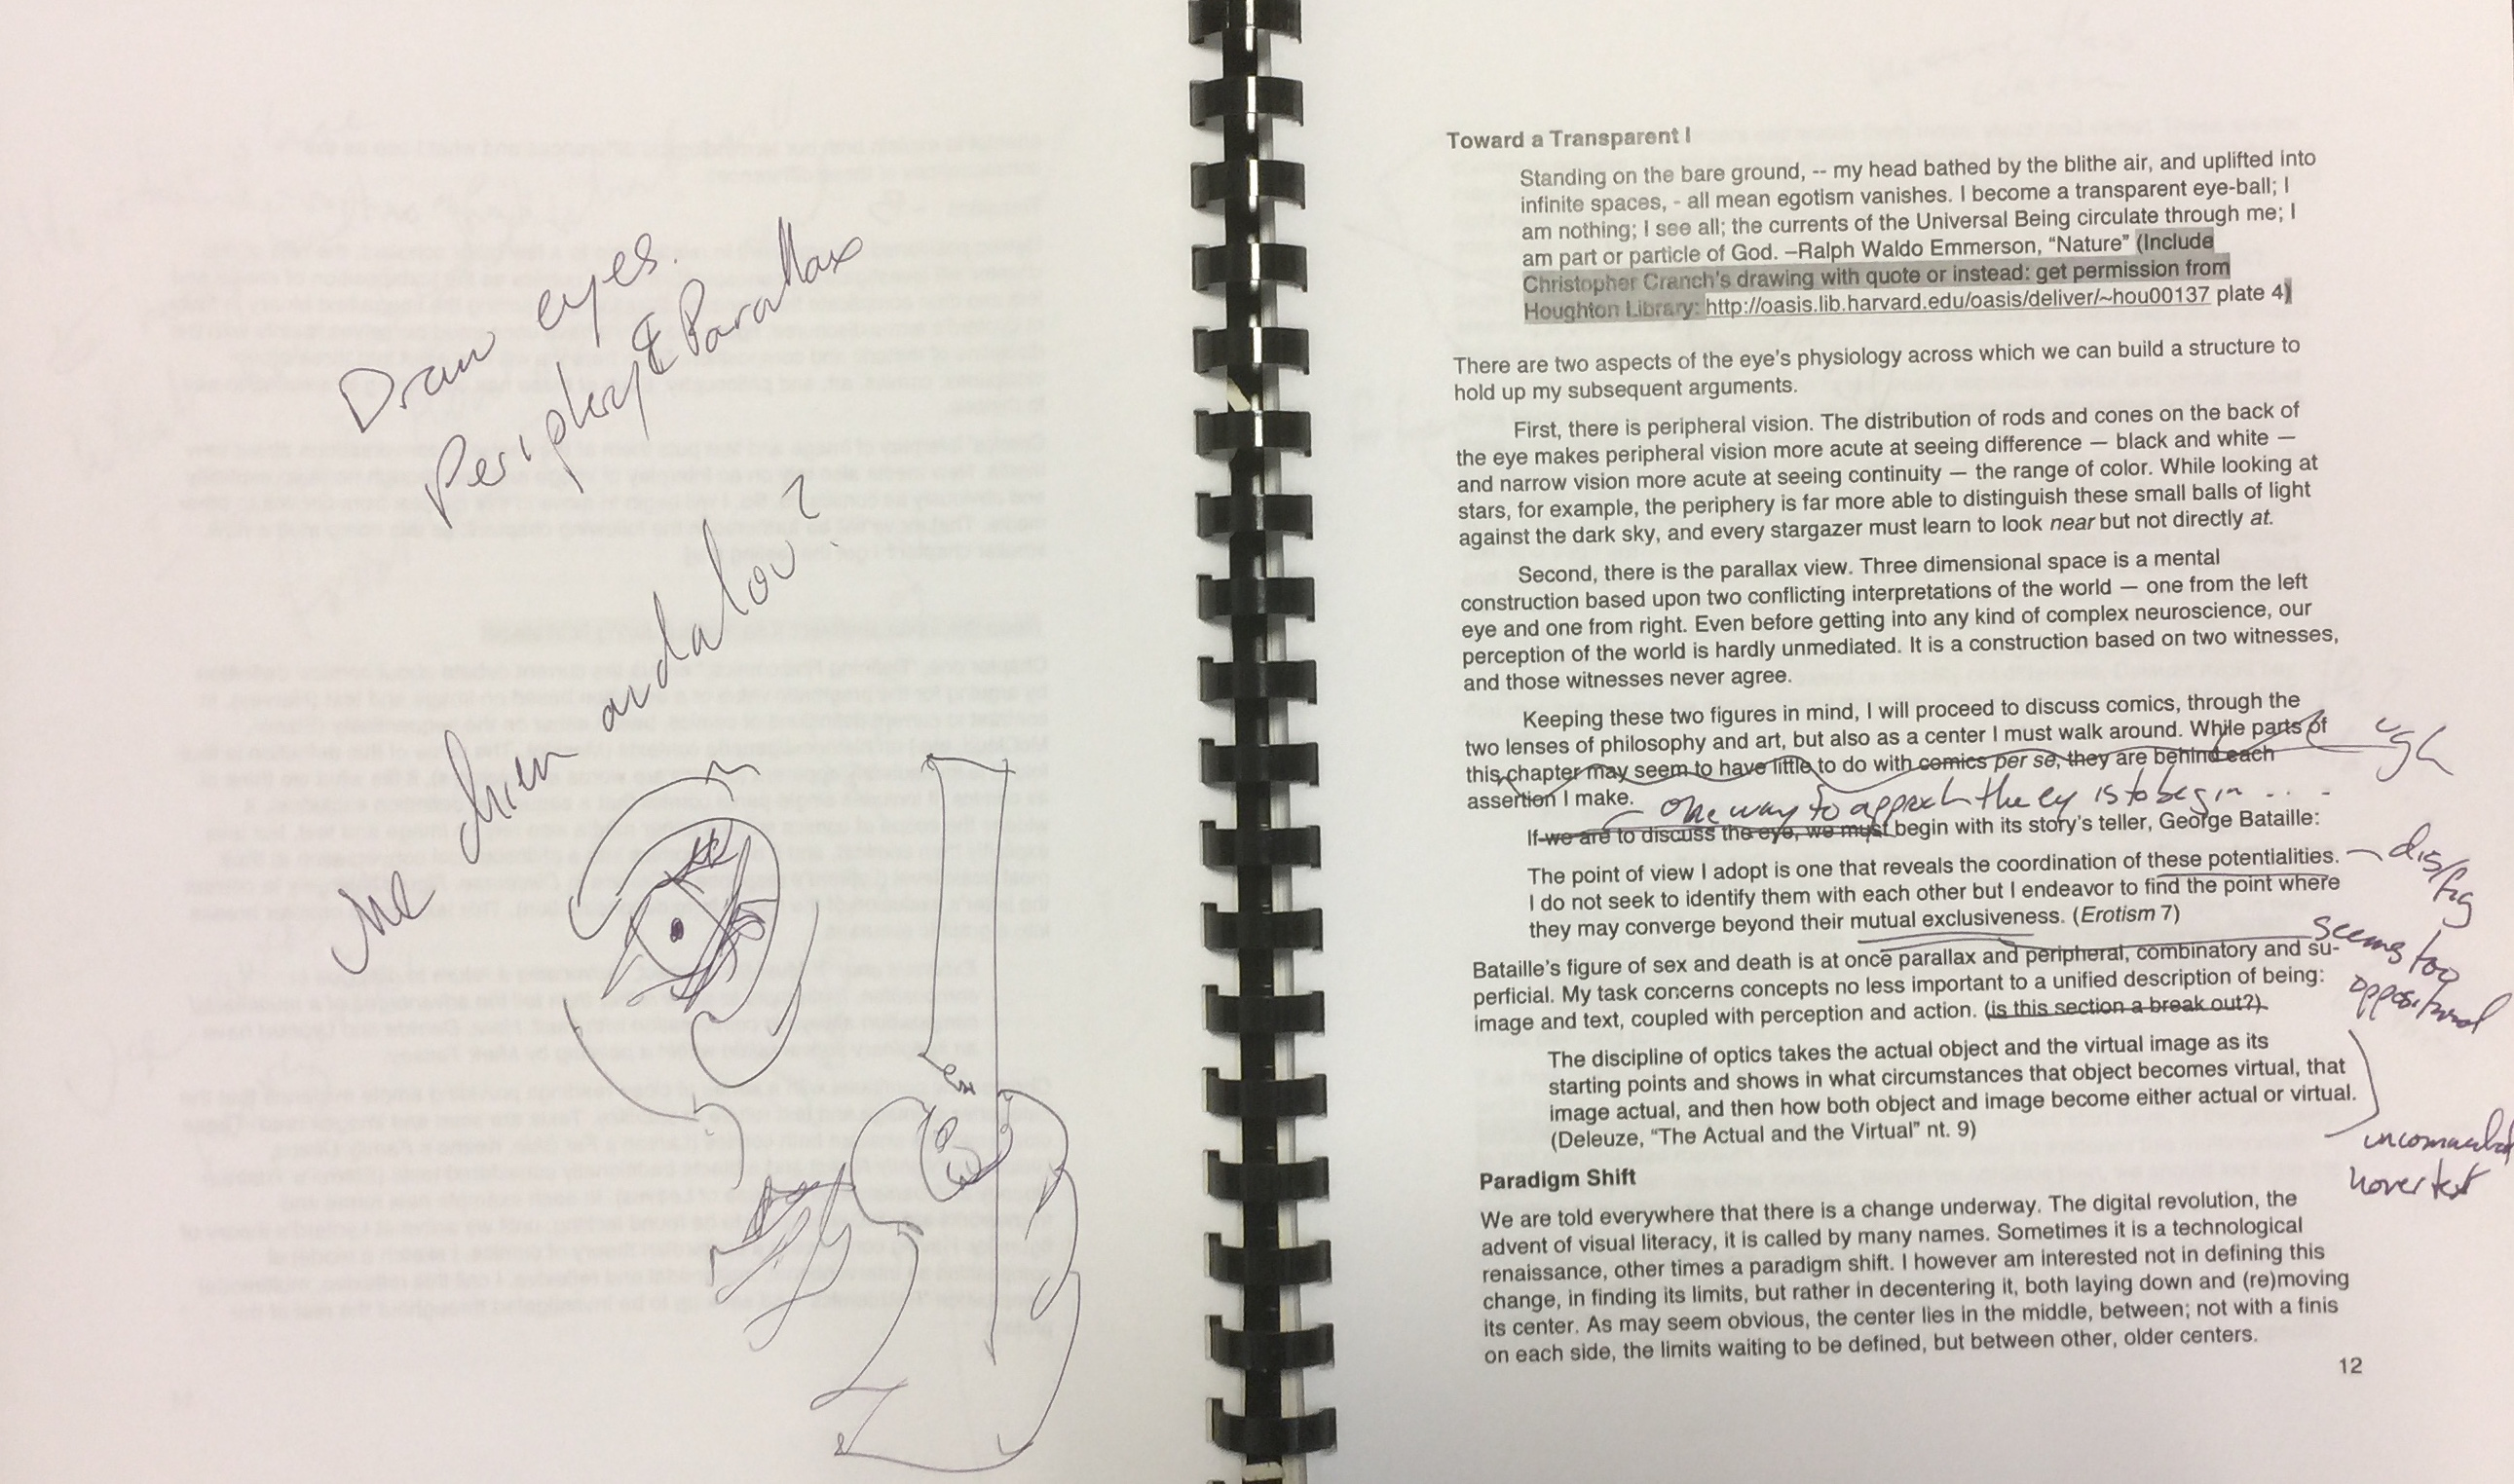 The bound draft, showing sketches on the blank left page and typed printed text on the right page